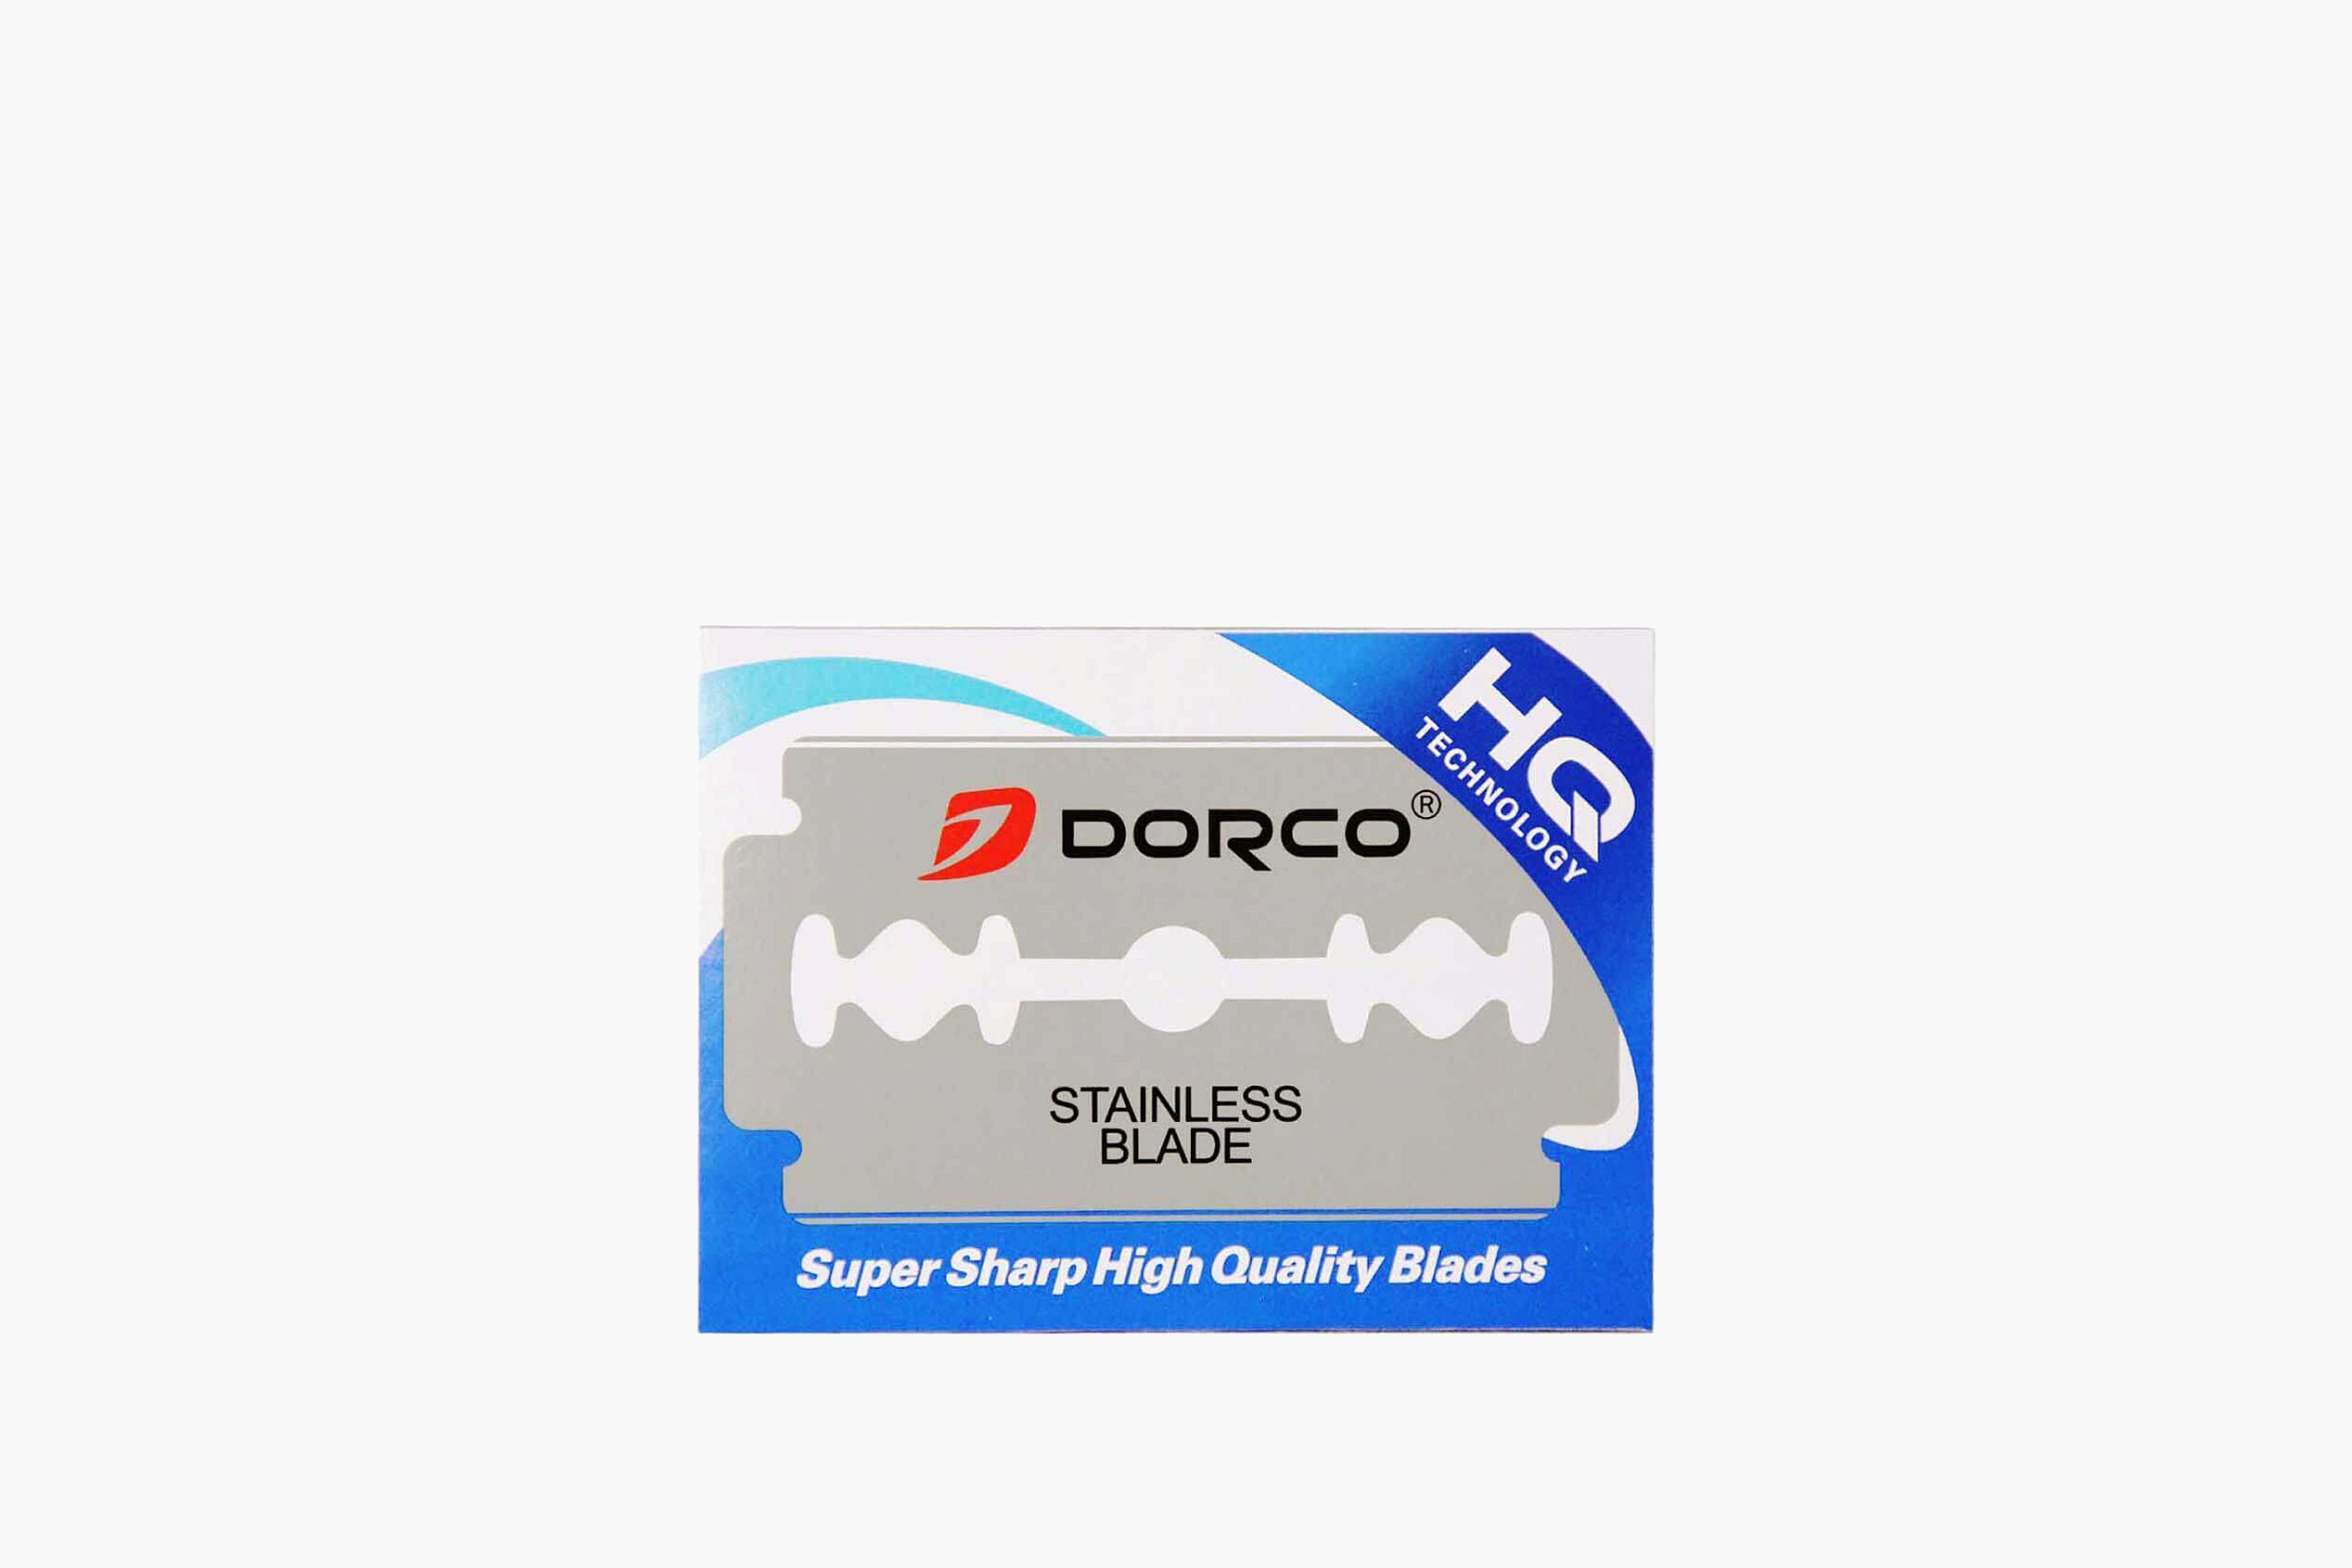 Dorco Blades are double-sided 5 per dispenser фото 1